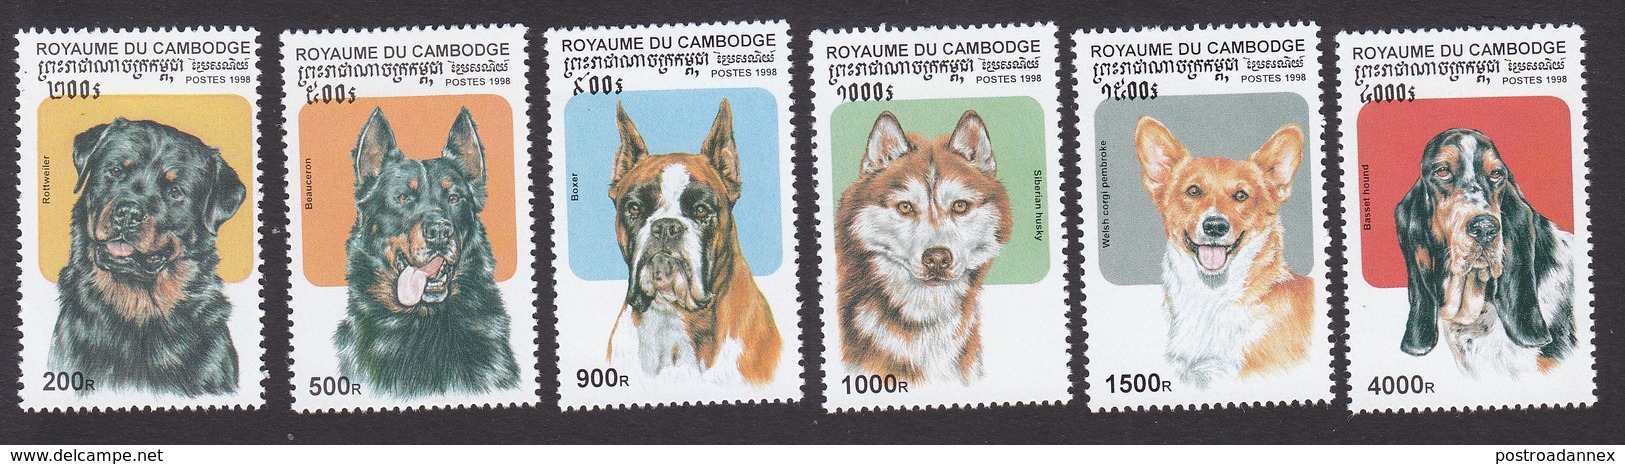 Cambodia, Scott #1734-1739, Mint Hinged, Dogs, Issued 1998 - Cambodge